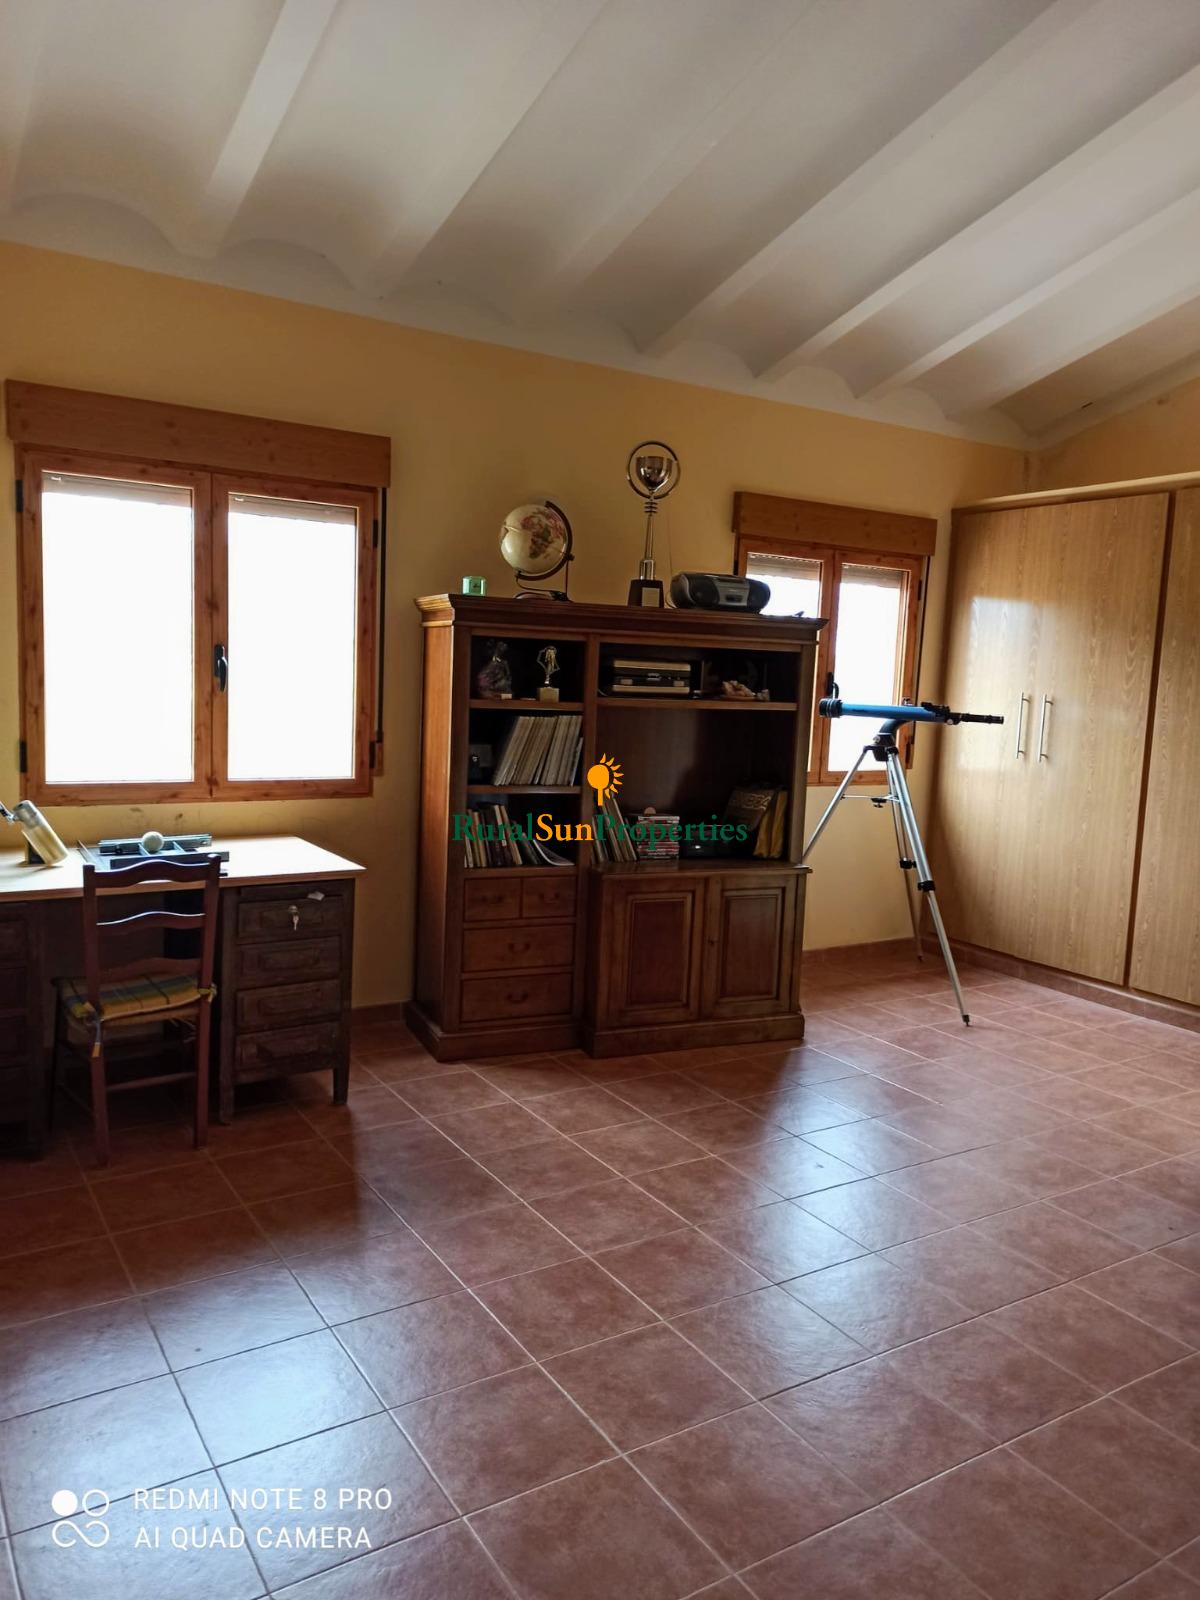 COUNTRY HOUSE IN BULLAS 3 kilometres from the town centre.